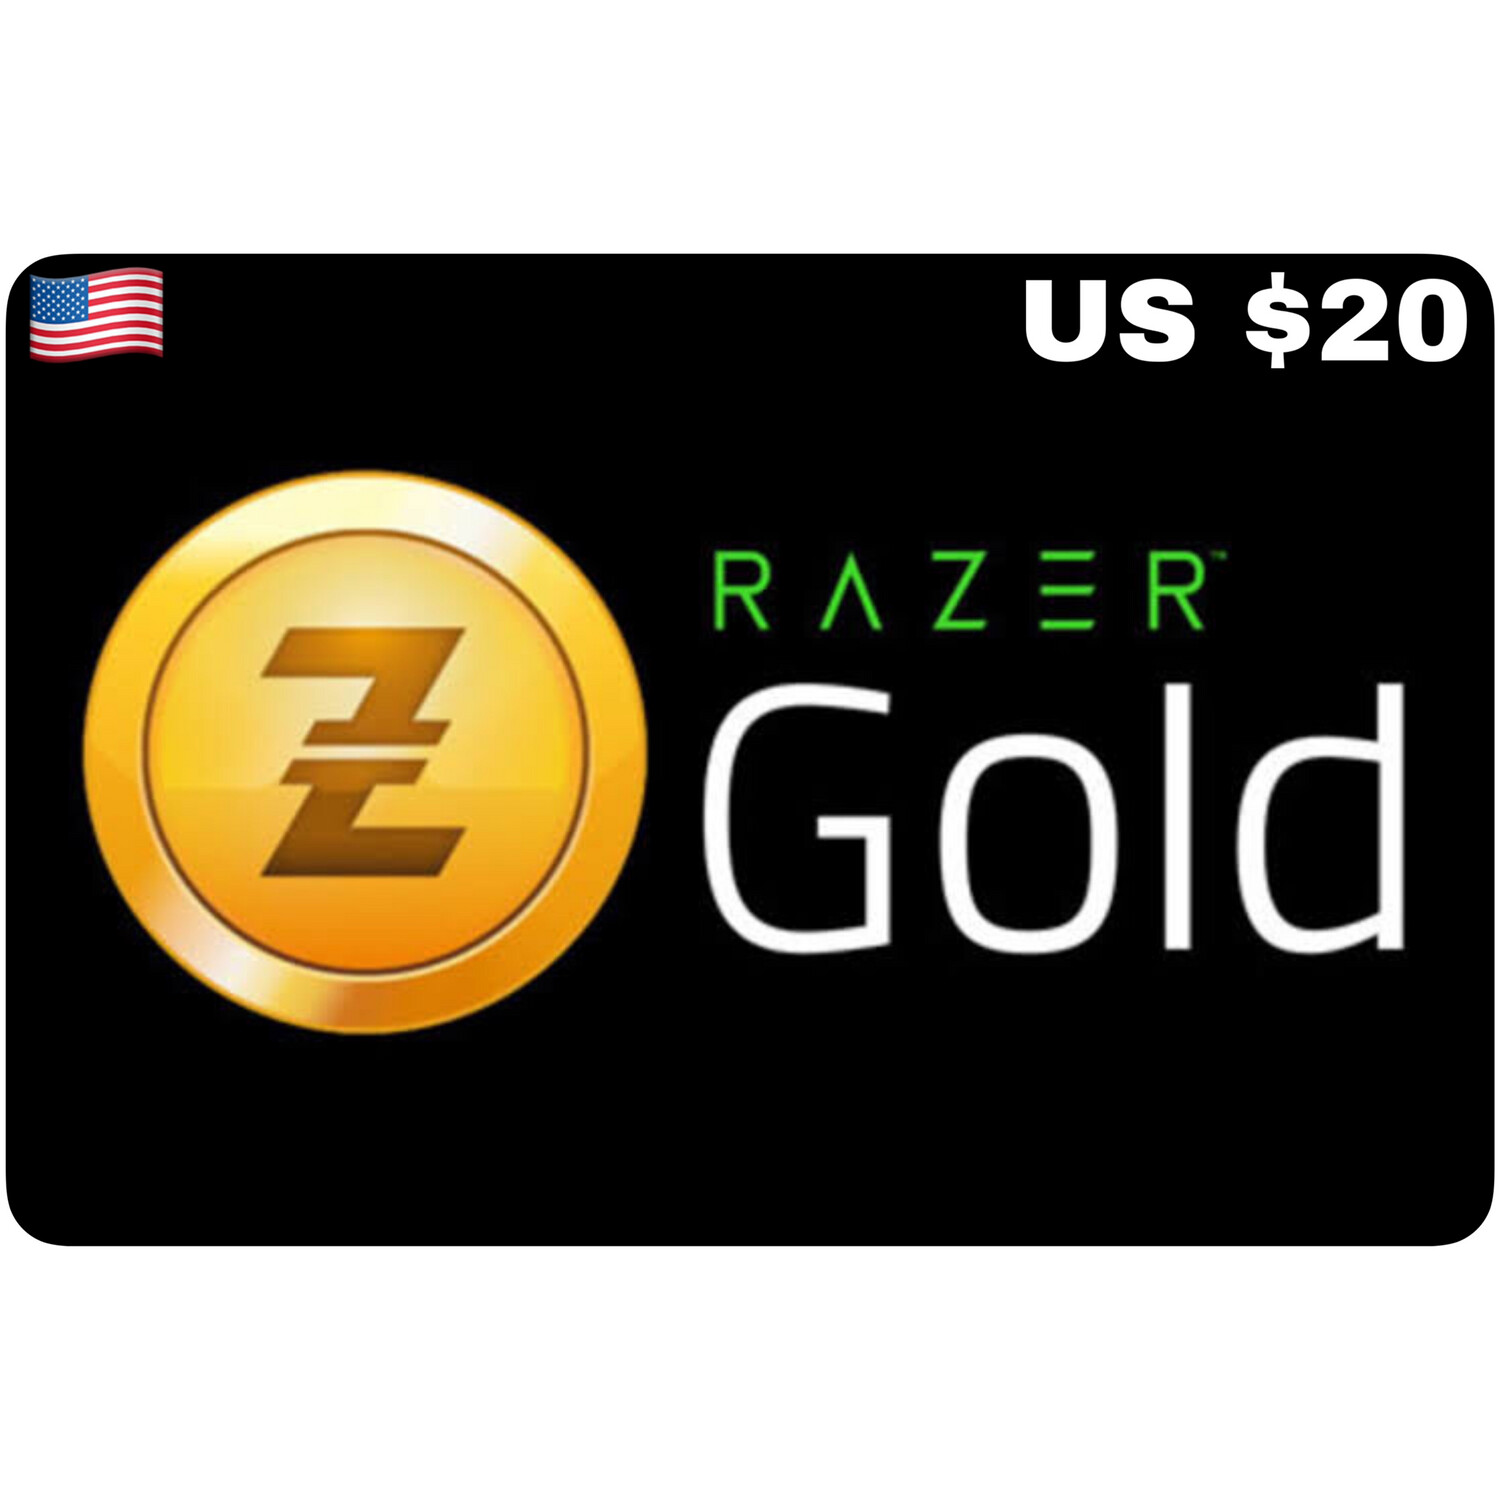 Razer Gold Pin US USD $20 Pin Only